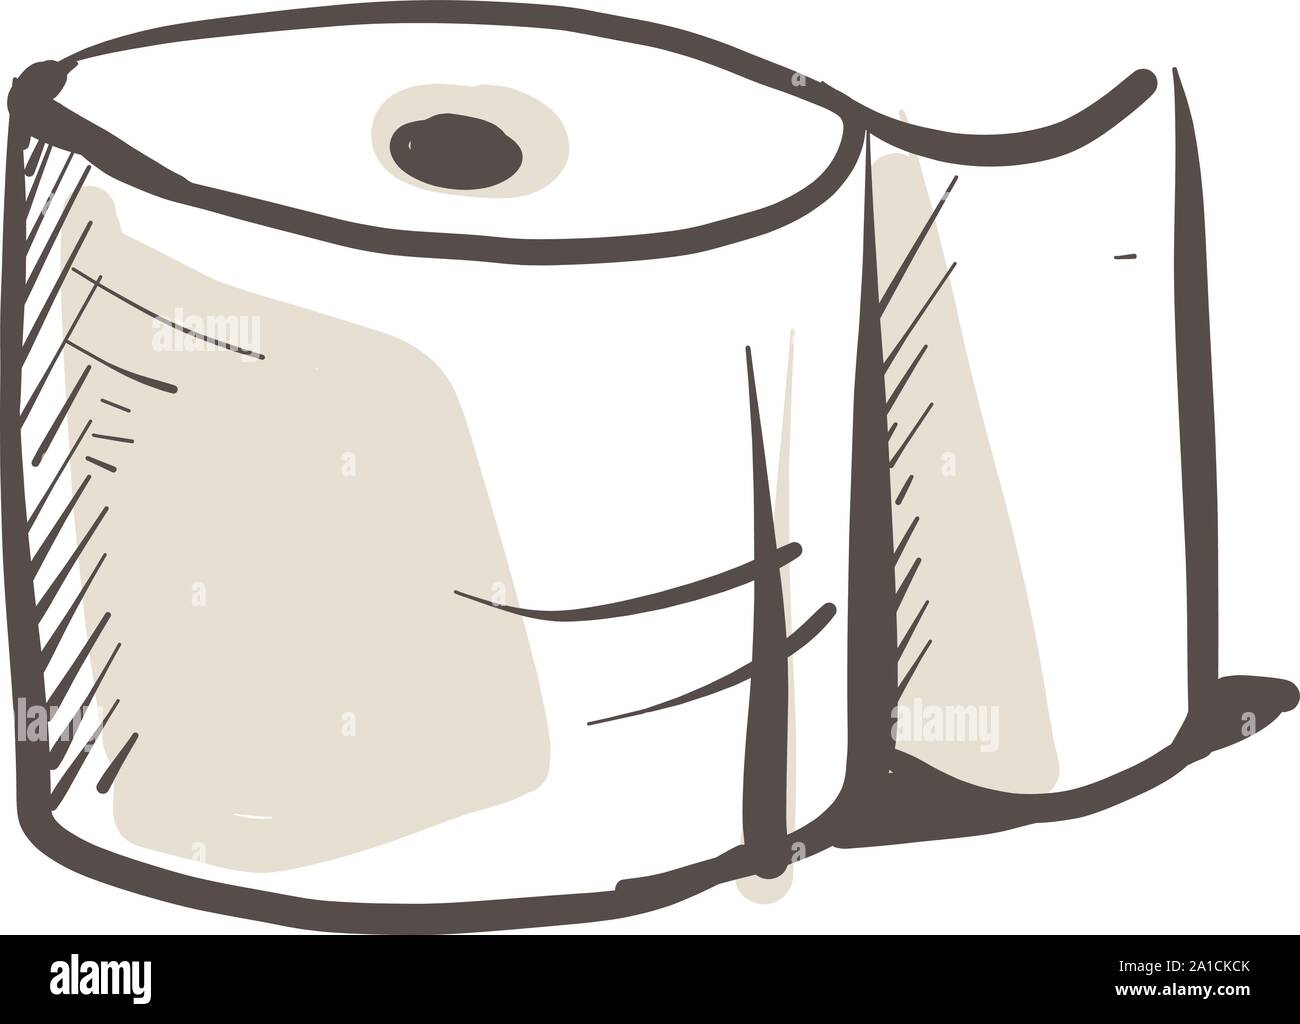 Toilet paper drawing, illustration, vector on white background. Stock Vector